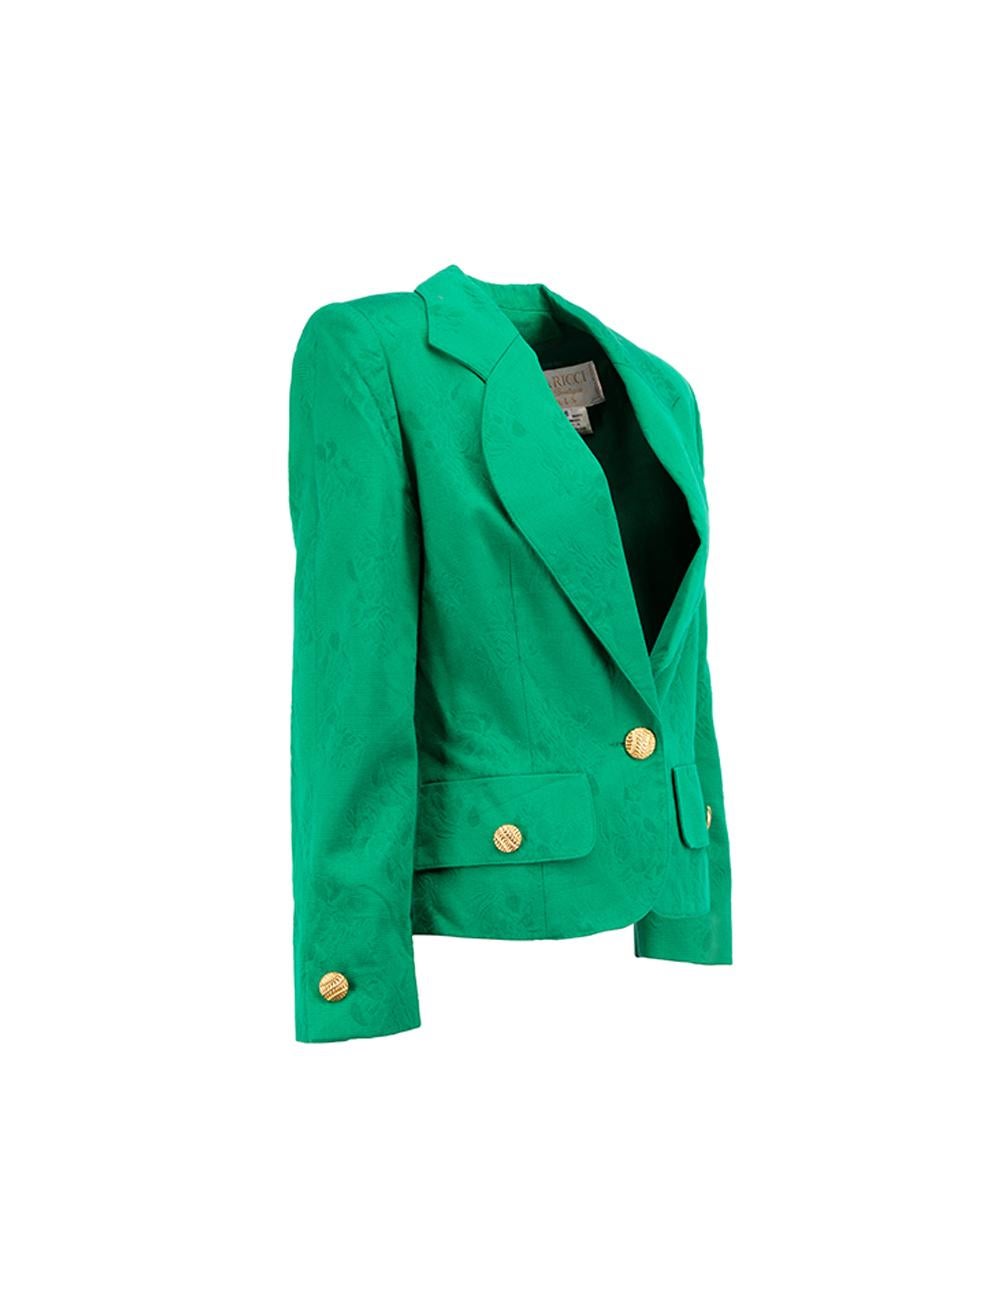 CONDITION is Very good. Hardly any visible wear to blazer is evident on this used Nina Ricci designer resale item. 



Details


Green

Cotton

Single breasted blazer

Floral embossed pattern

Buttoned cuffs

Shoulder padded

Buttoned flap